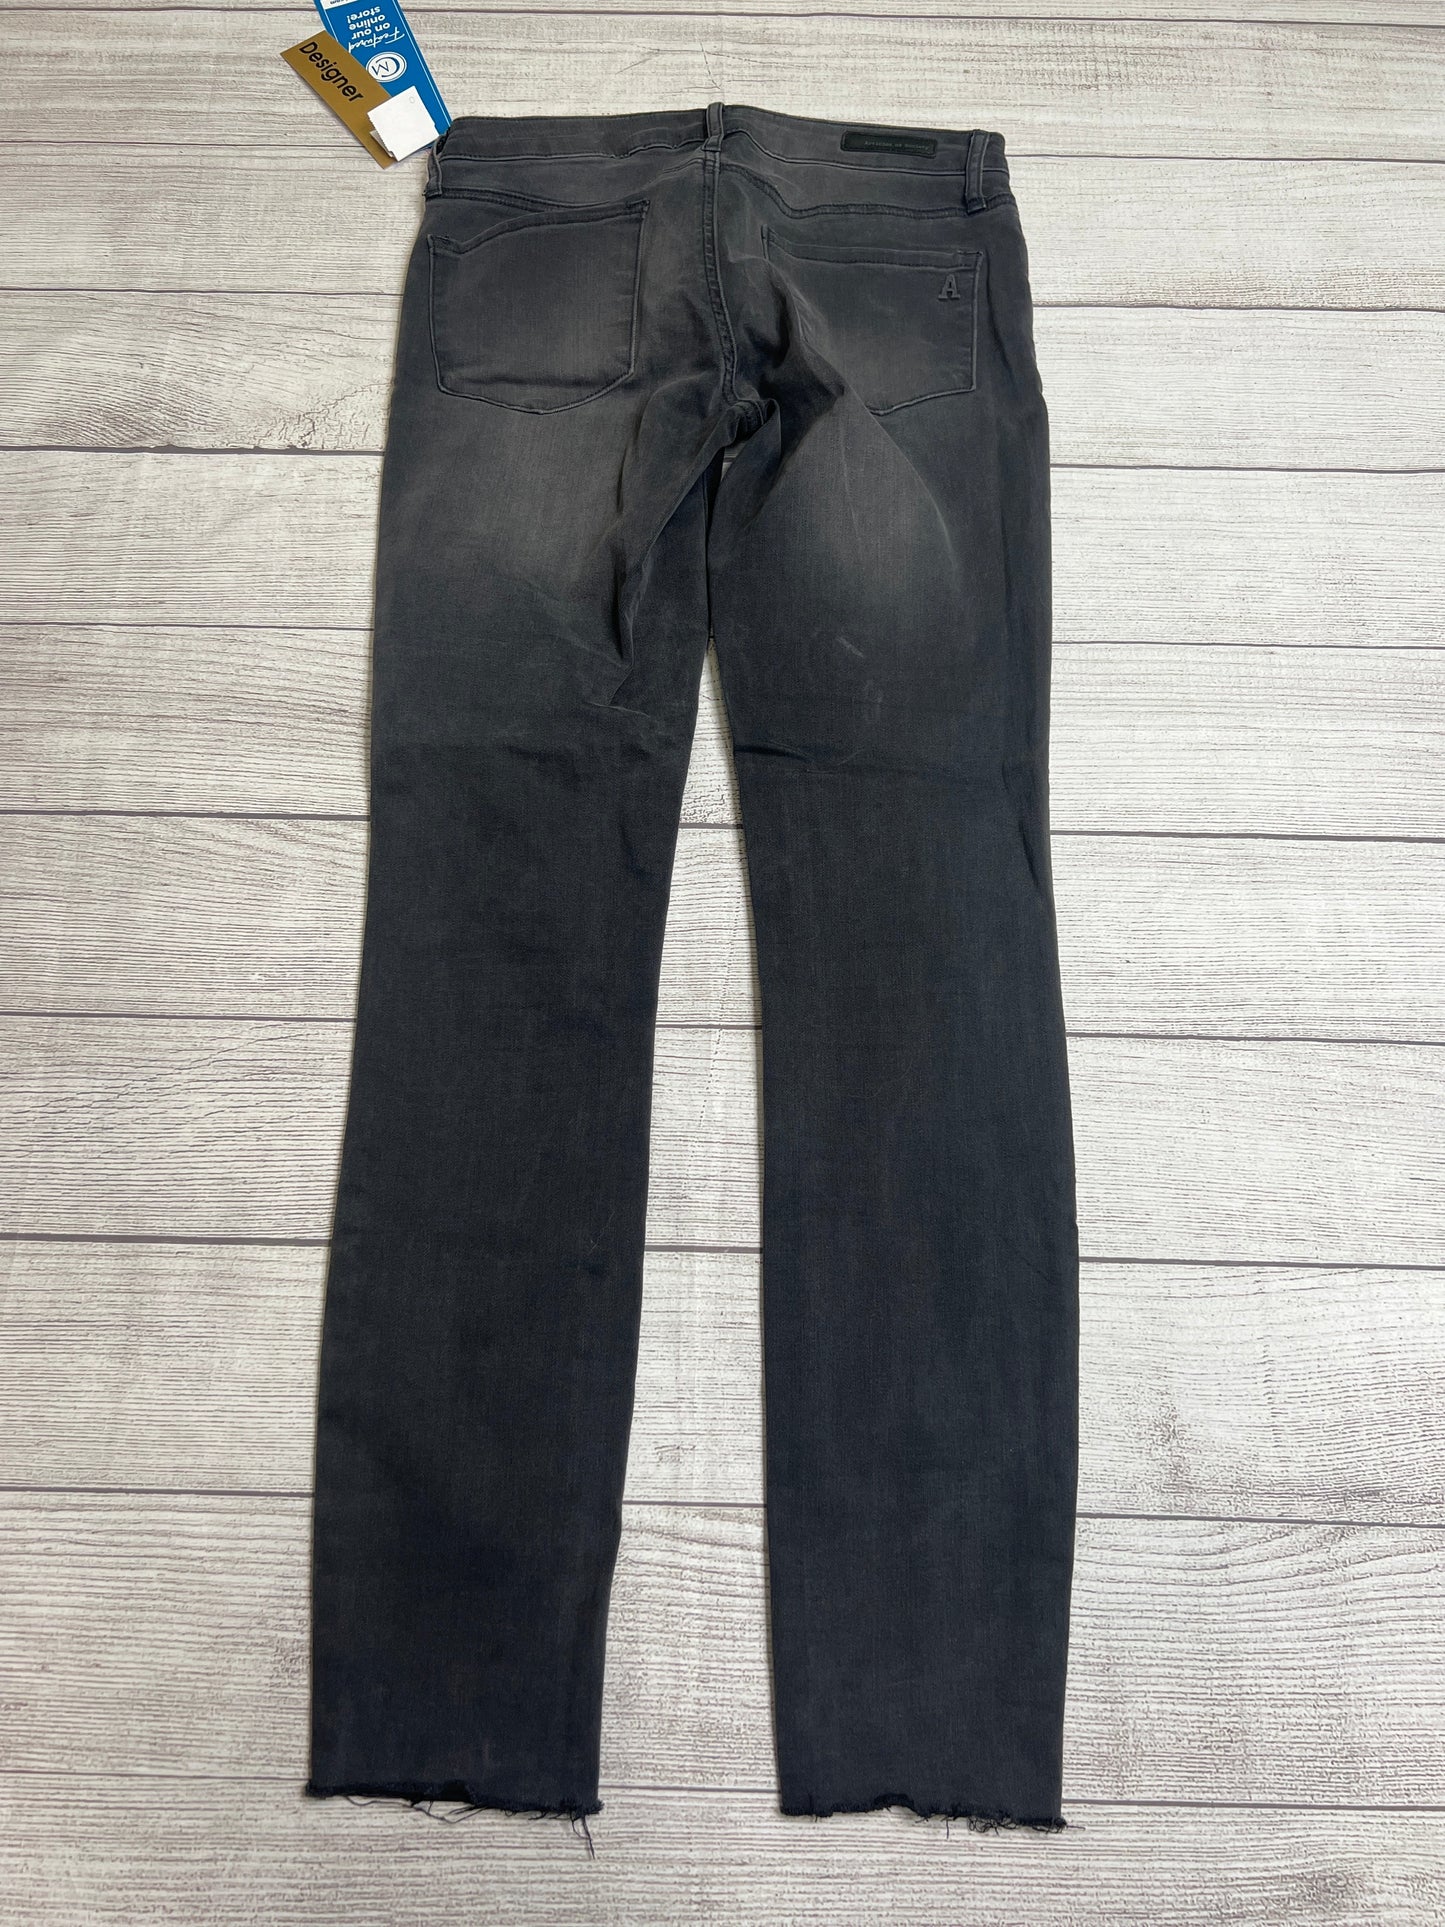 Jeans Skinny By Articles Of Society  Size: 4/26